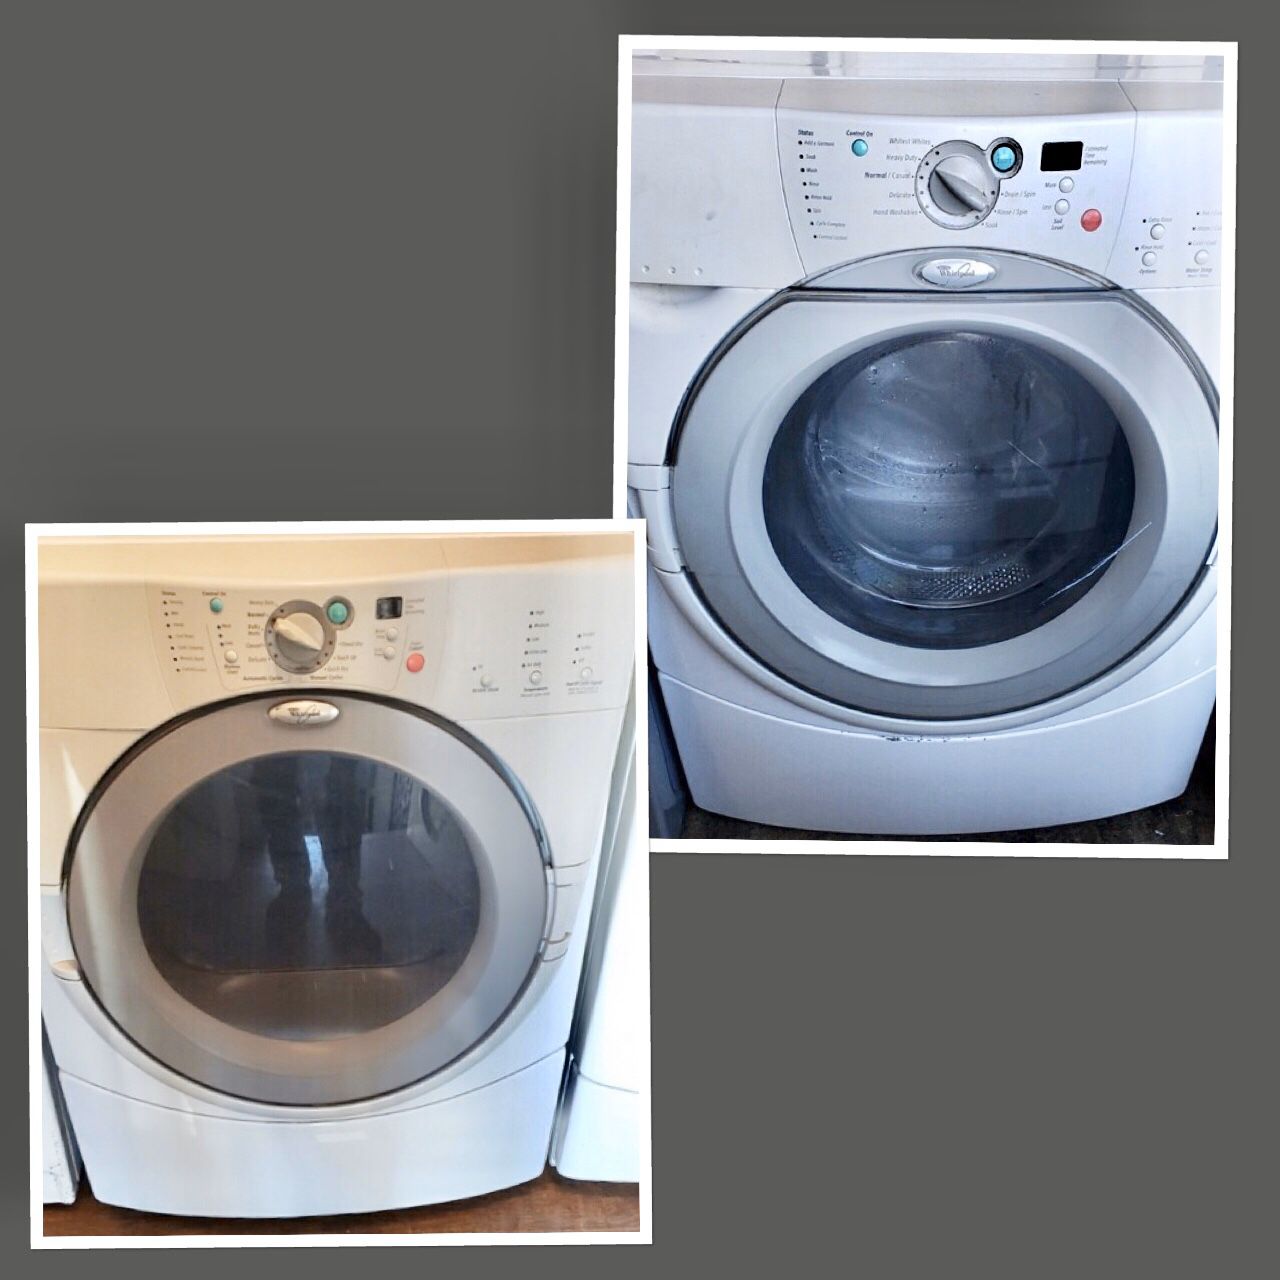 Whirlpool Duet Front Load Washer Dryer - Can Be Stacked! Large Tubs! Guaranteed! Whirlpool Duet Front Load Washing Machine & Electric Dryer! 3.5